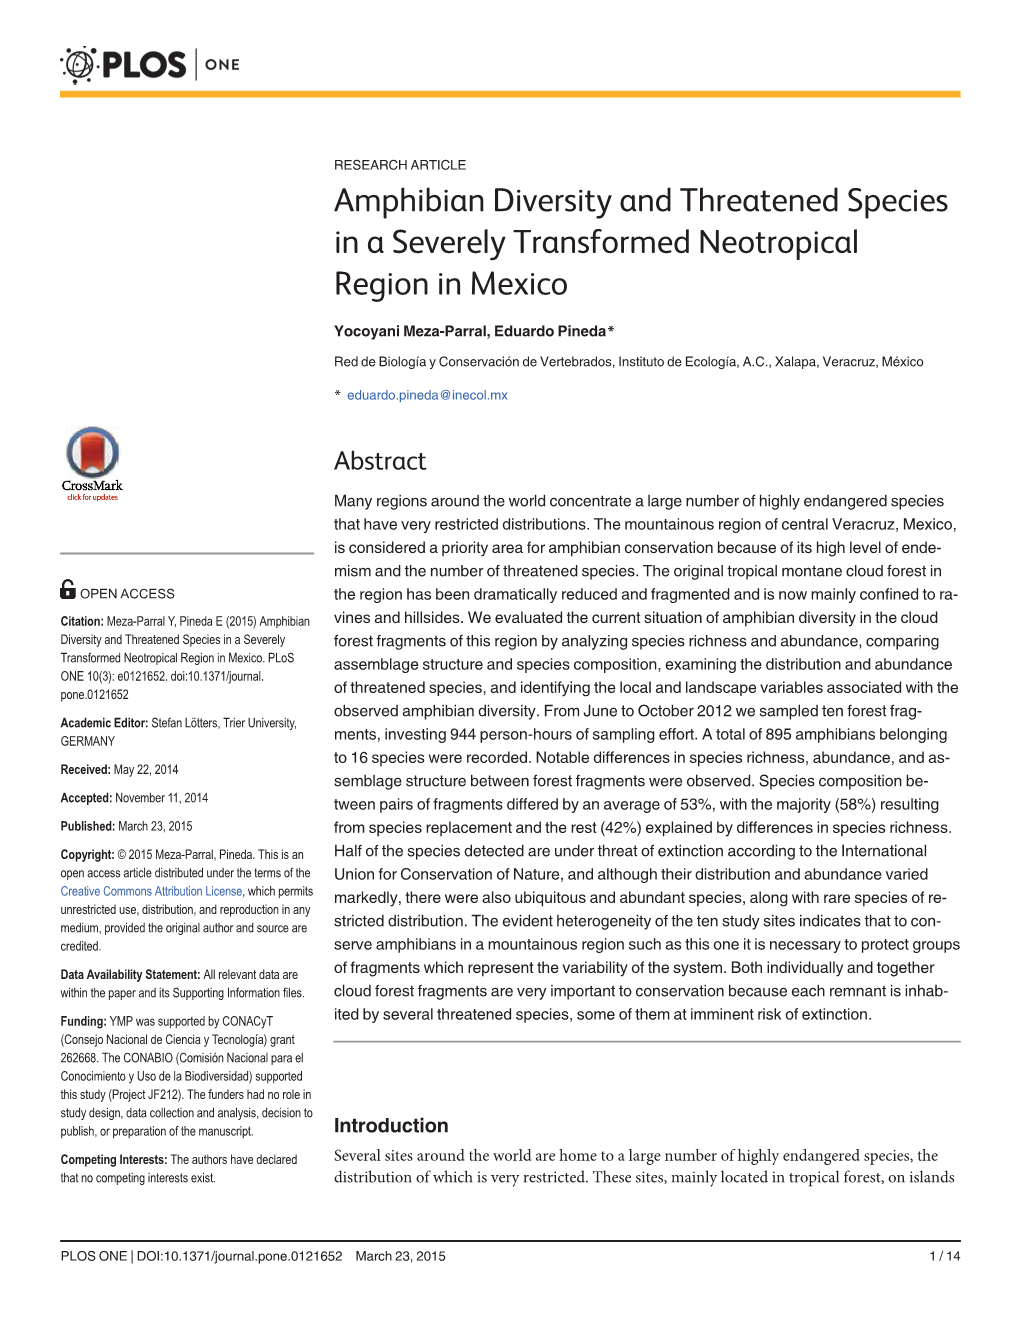 Amphibian Diversity and Threatened Species in a Severely Transformed Neotropical Region in Mexico